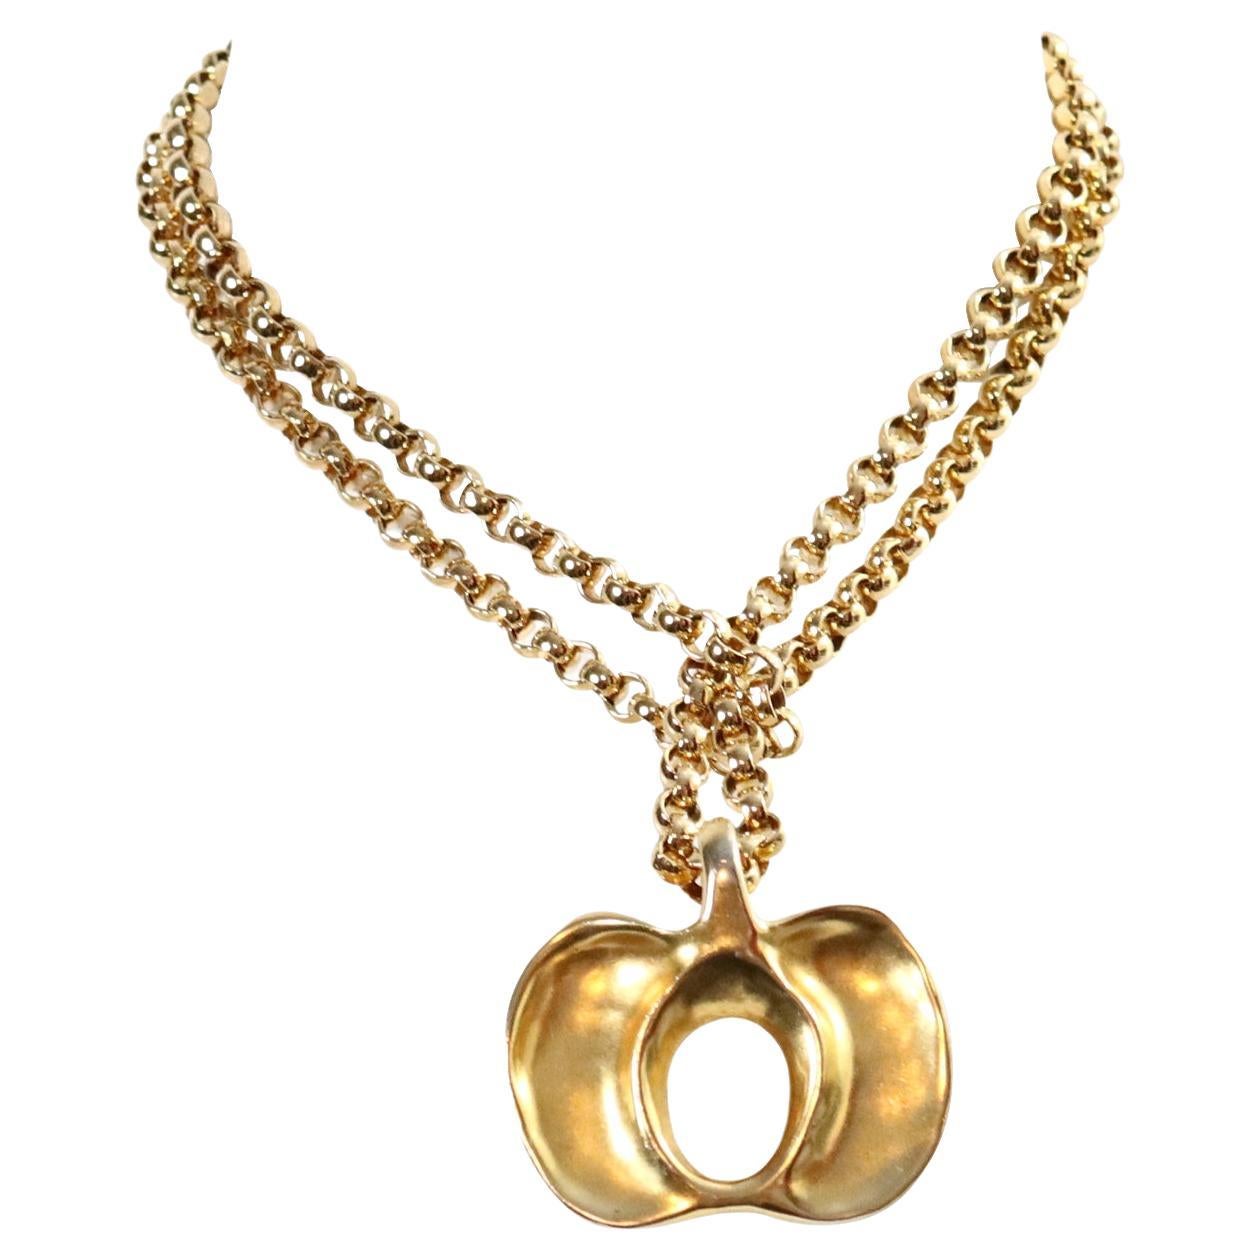 Vintage Robert Lee Morris Gold Pendant Circa 1980's.  This gorgeous RLM pendant could be abstract or many things.  Could be an apple or something else.  Not sure but it is chic and quite current and will always be on trend.  It is on a  long Rollo